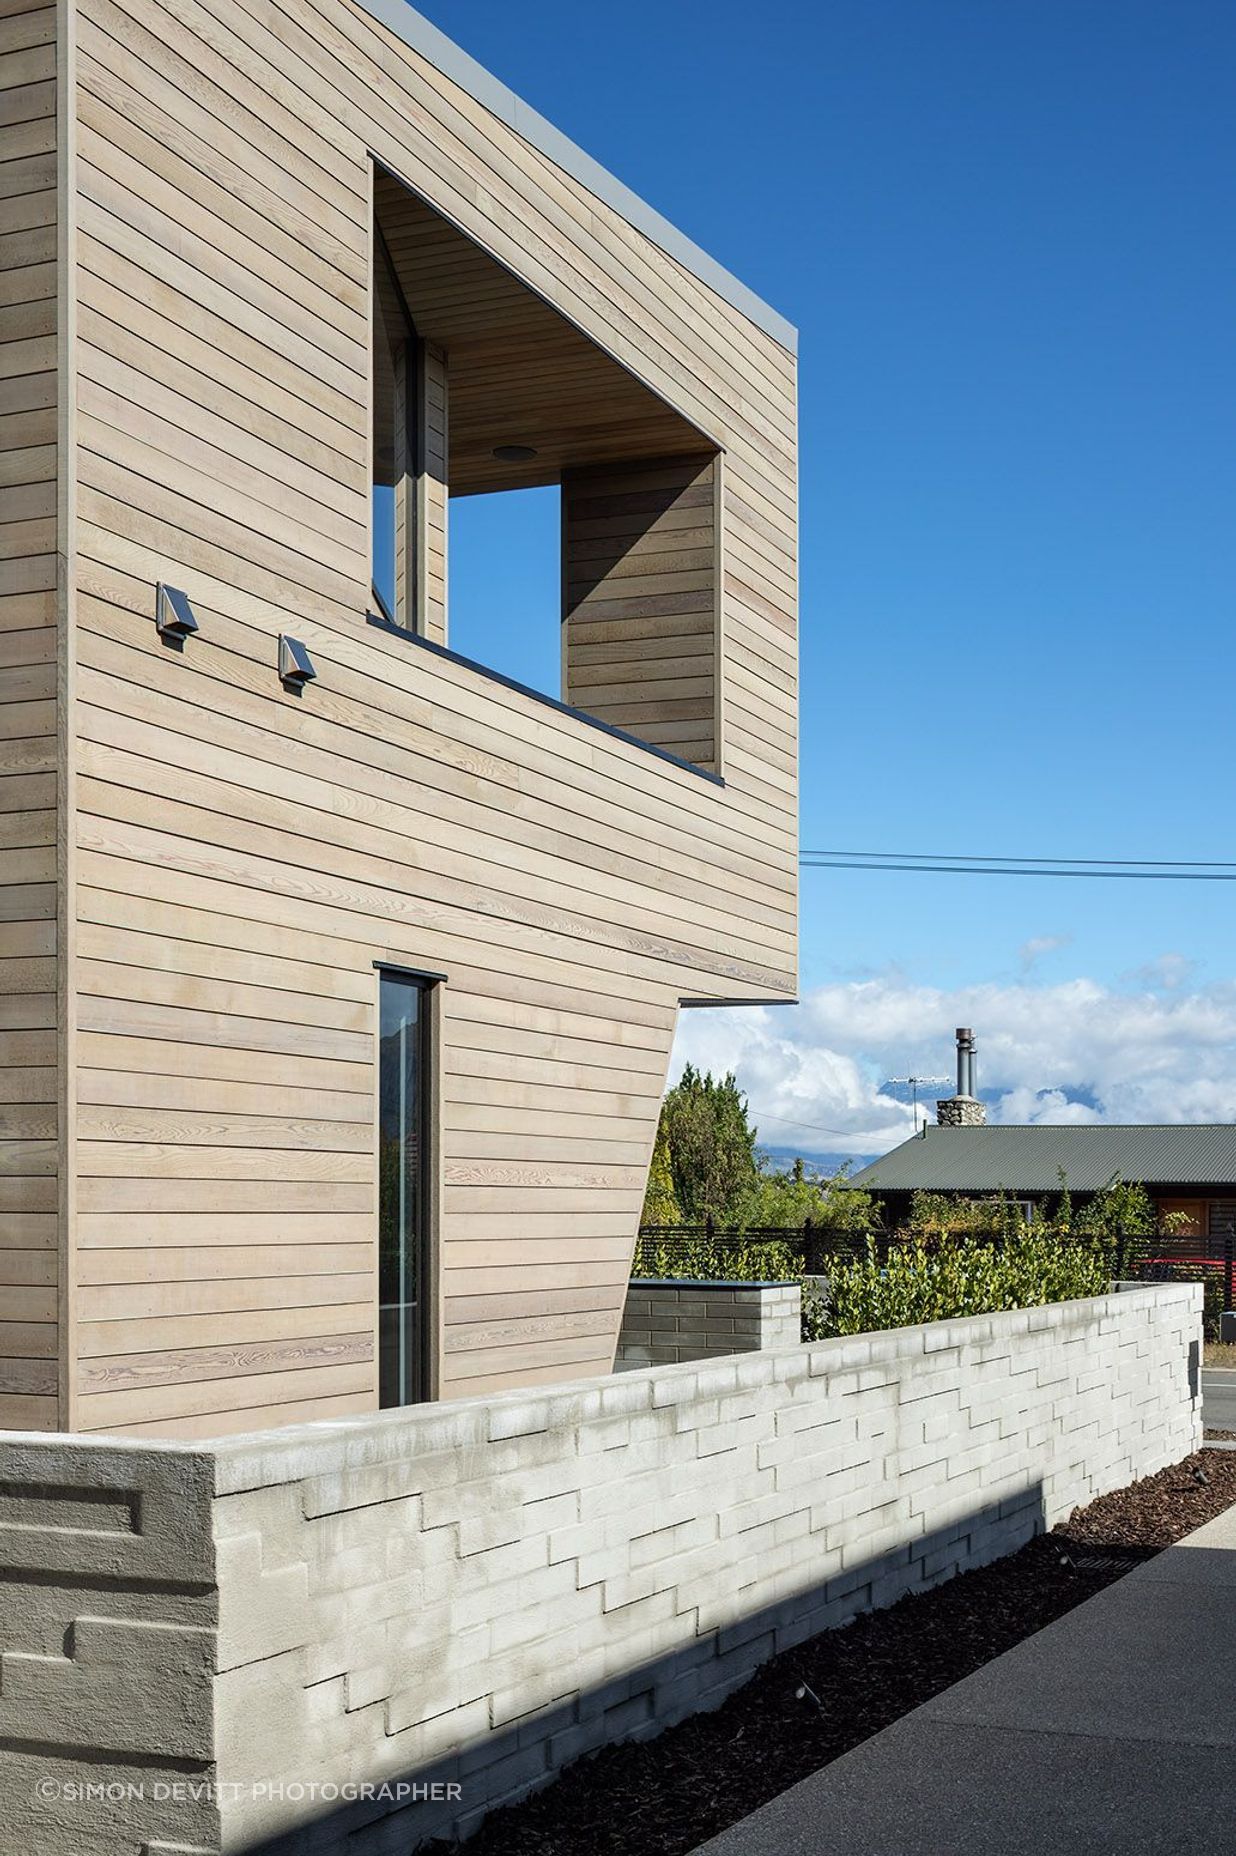 The exterior wall in half-width concrete blocks has been arranged haphardly to create a textural surface.